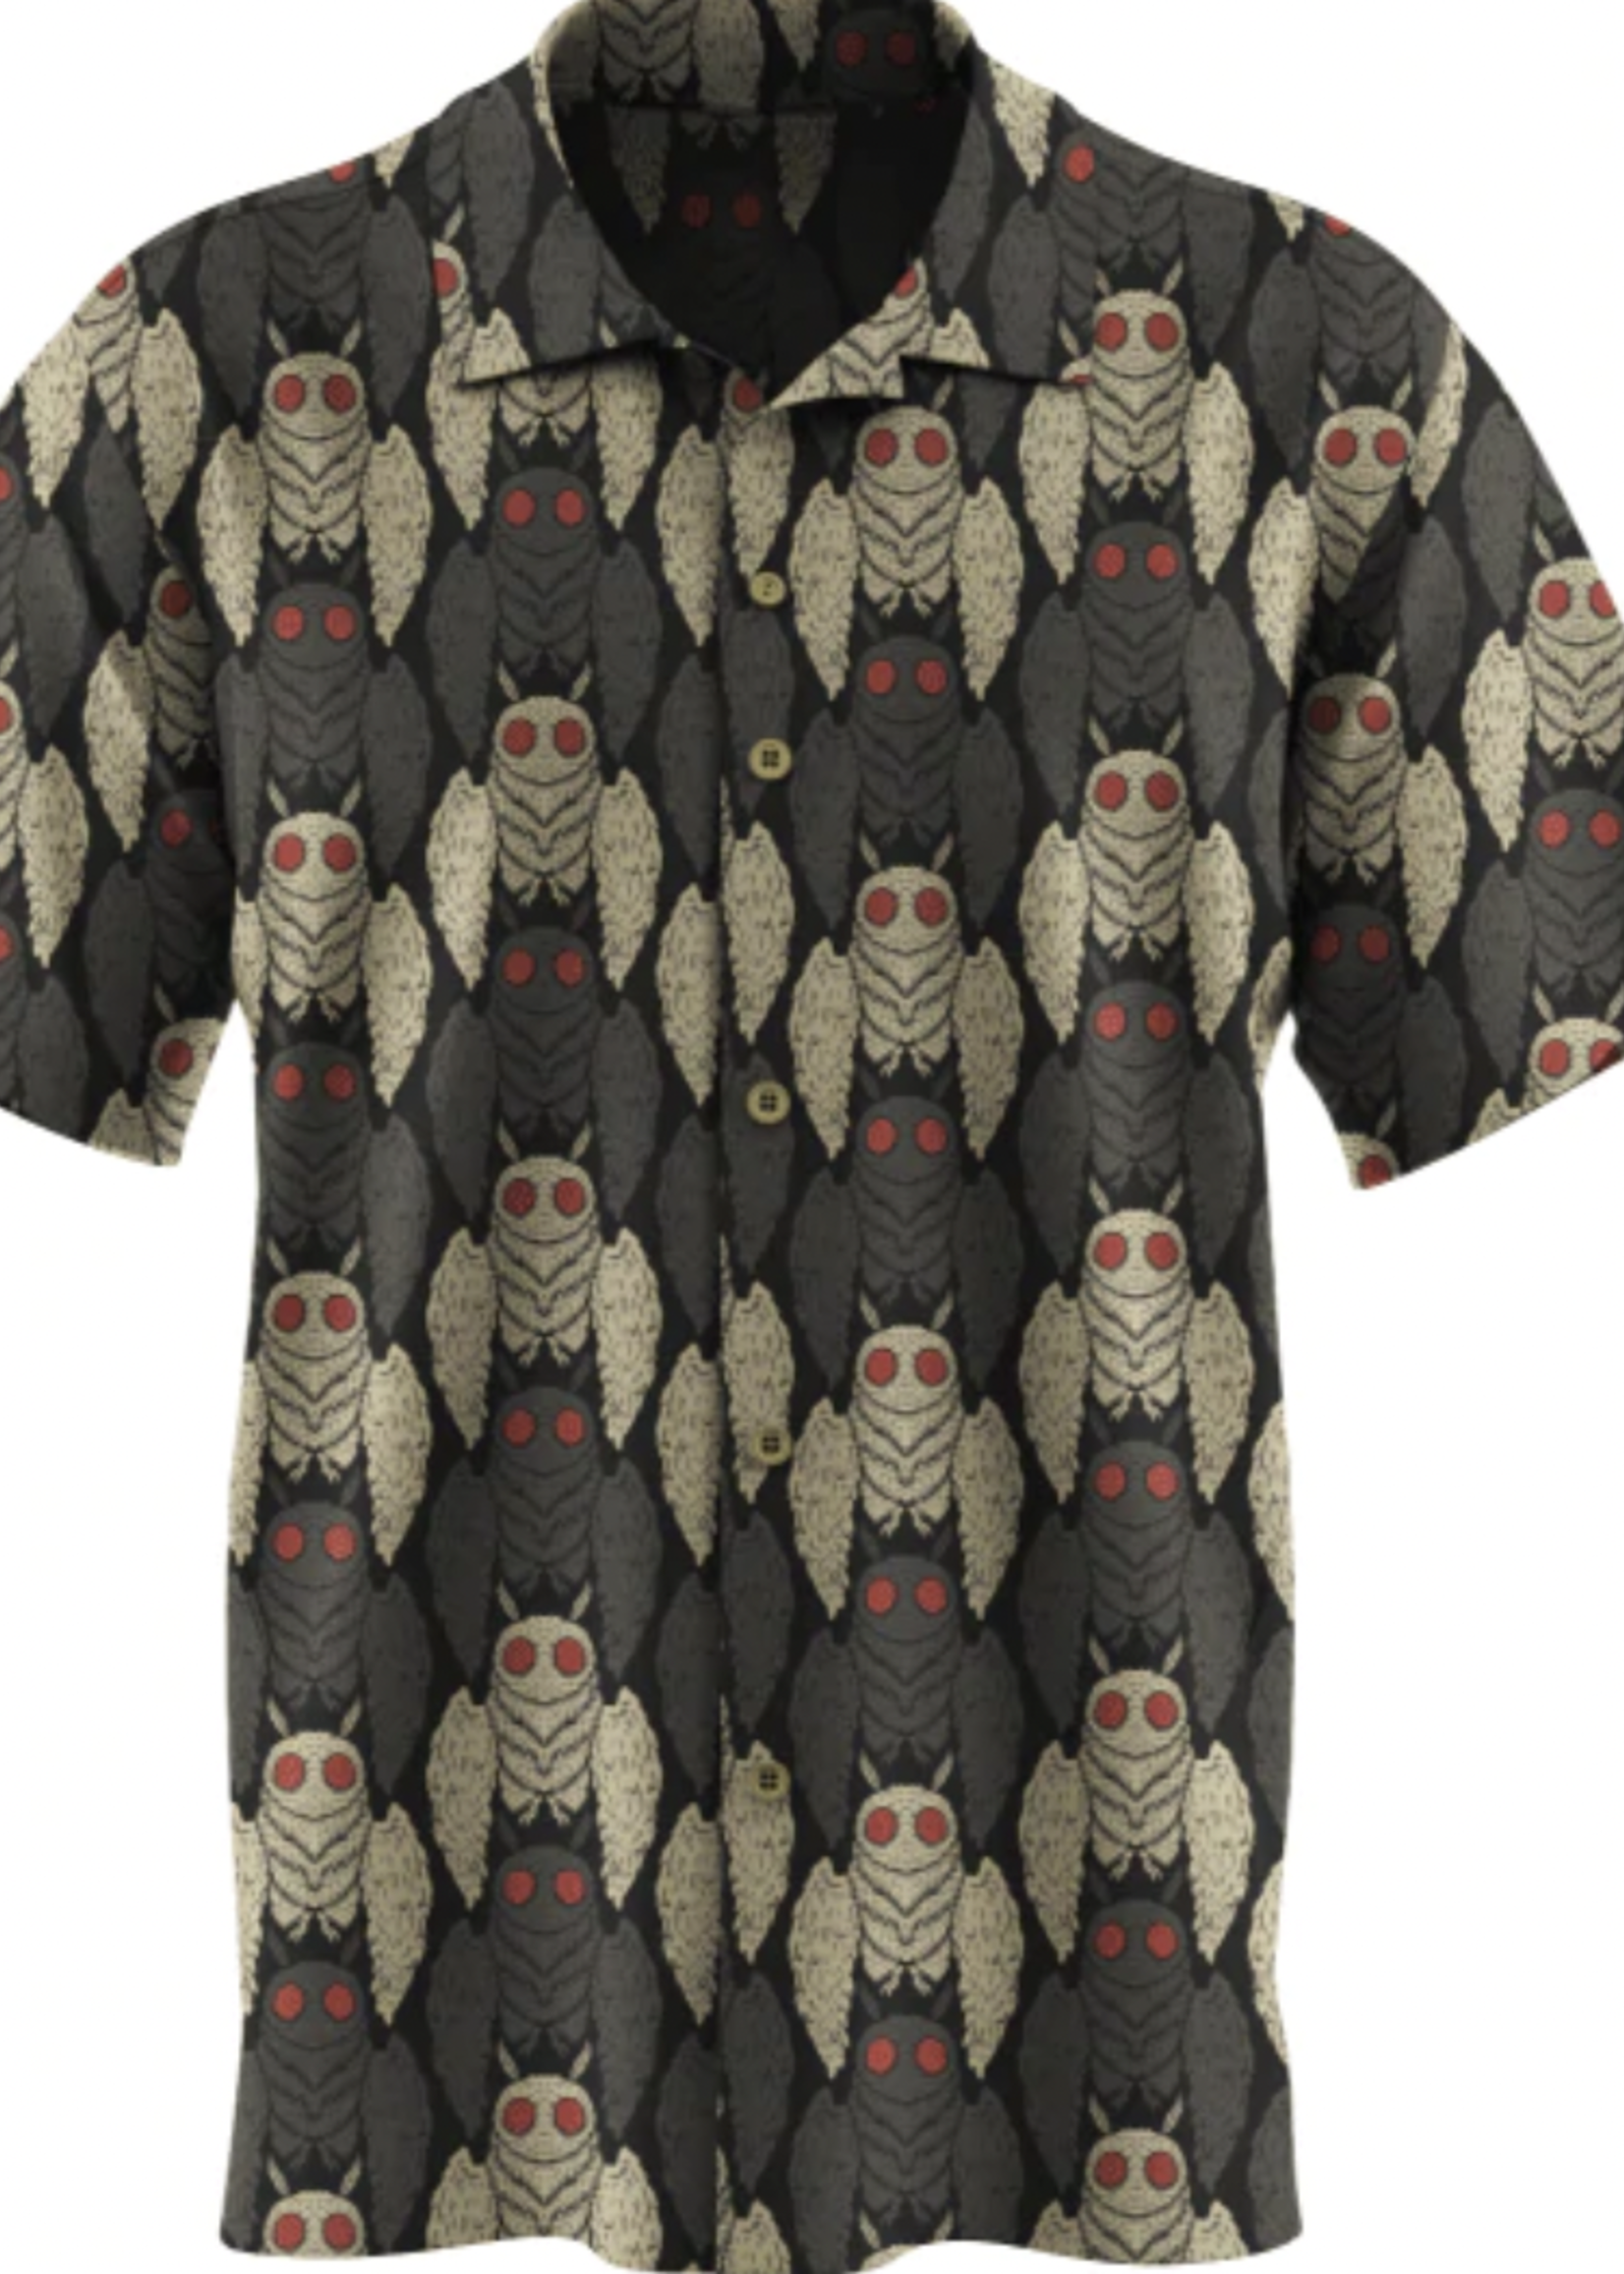 Wicked Clothes "Mothman" Button Up Shirt